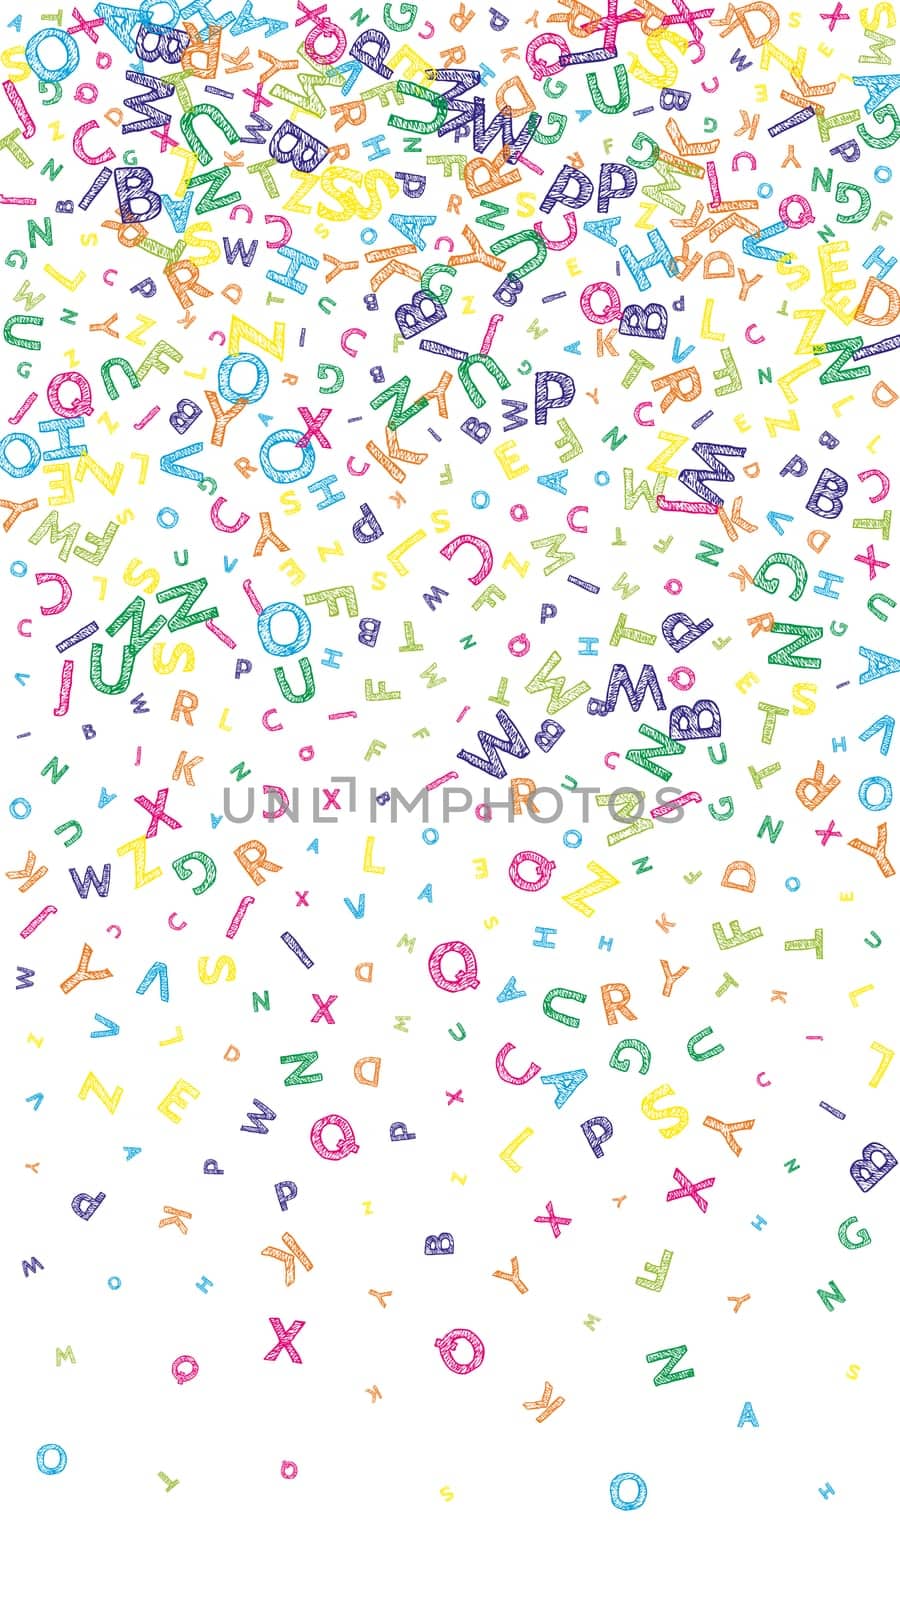 Falling letters of English language. Colorful messy sketch flying words of Latin alphabet. Foreign languages study concept. Ravishing back to school banner on white background.